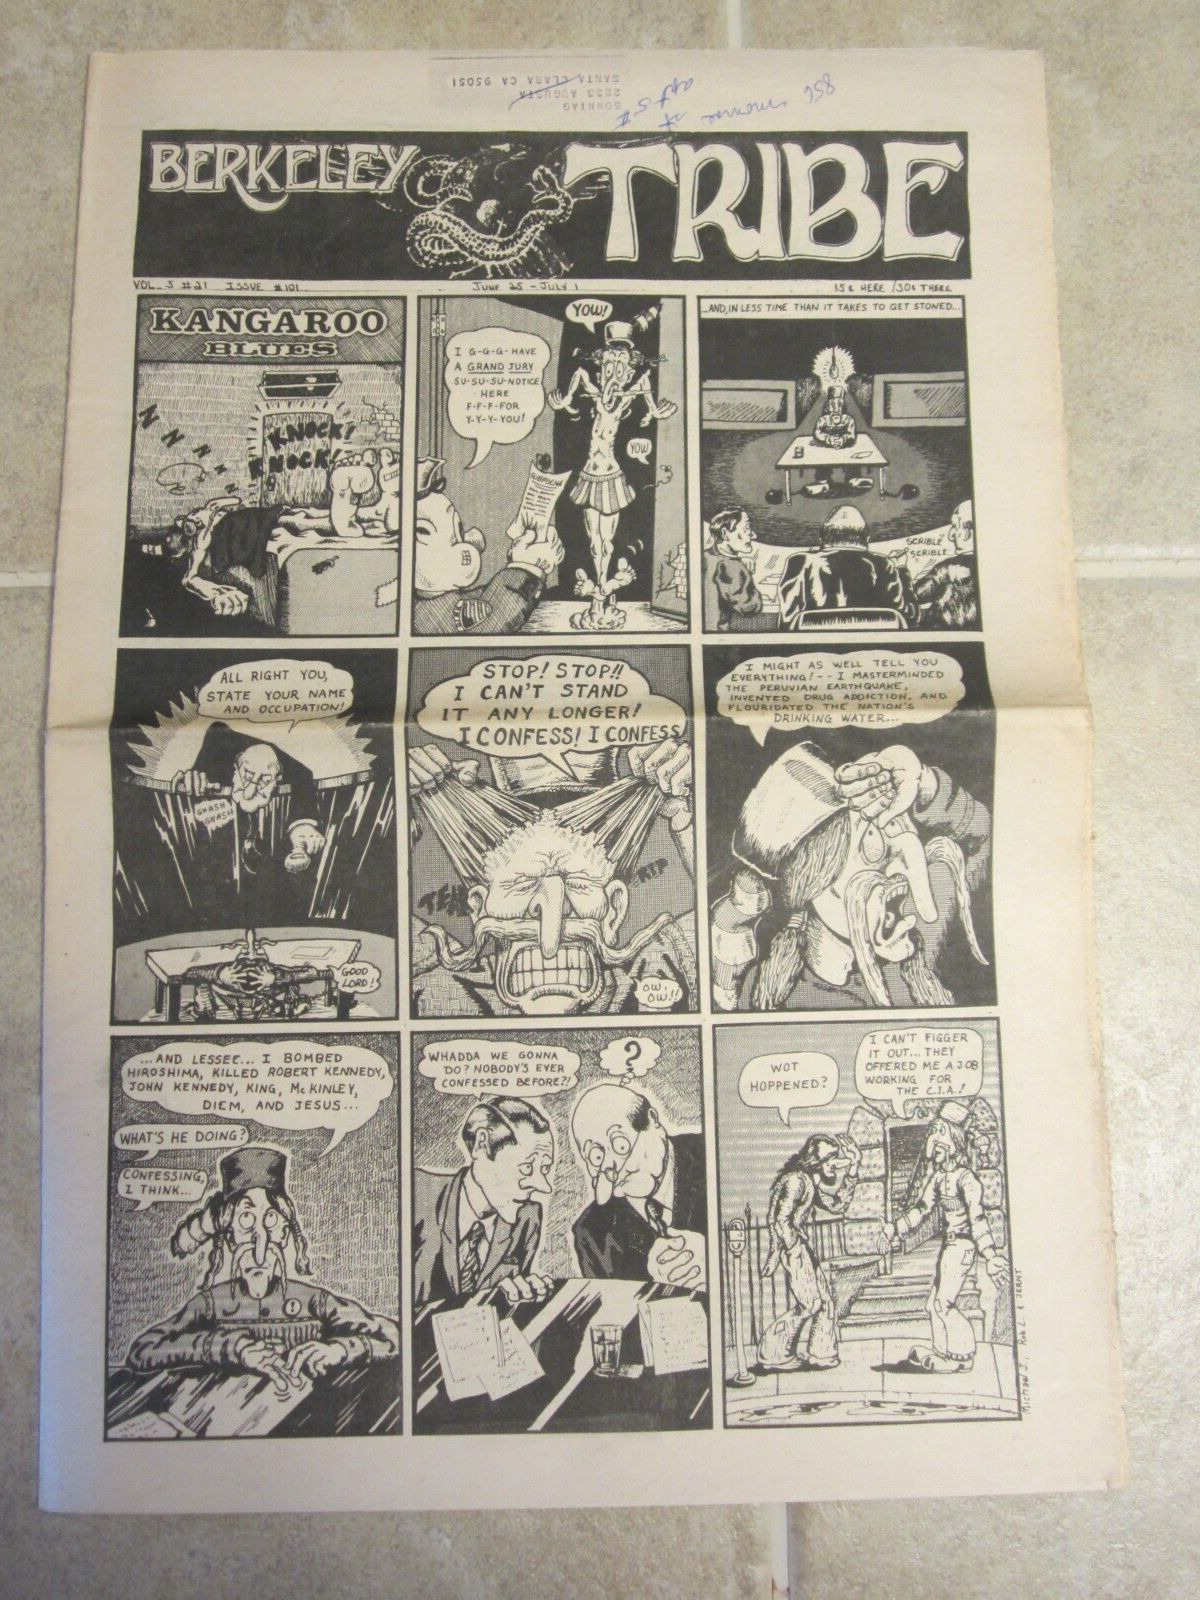 Berkeley Tribe Newspaper June 1971 Kangaroo Blues Panther in L.A. Uneasy Rider